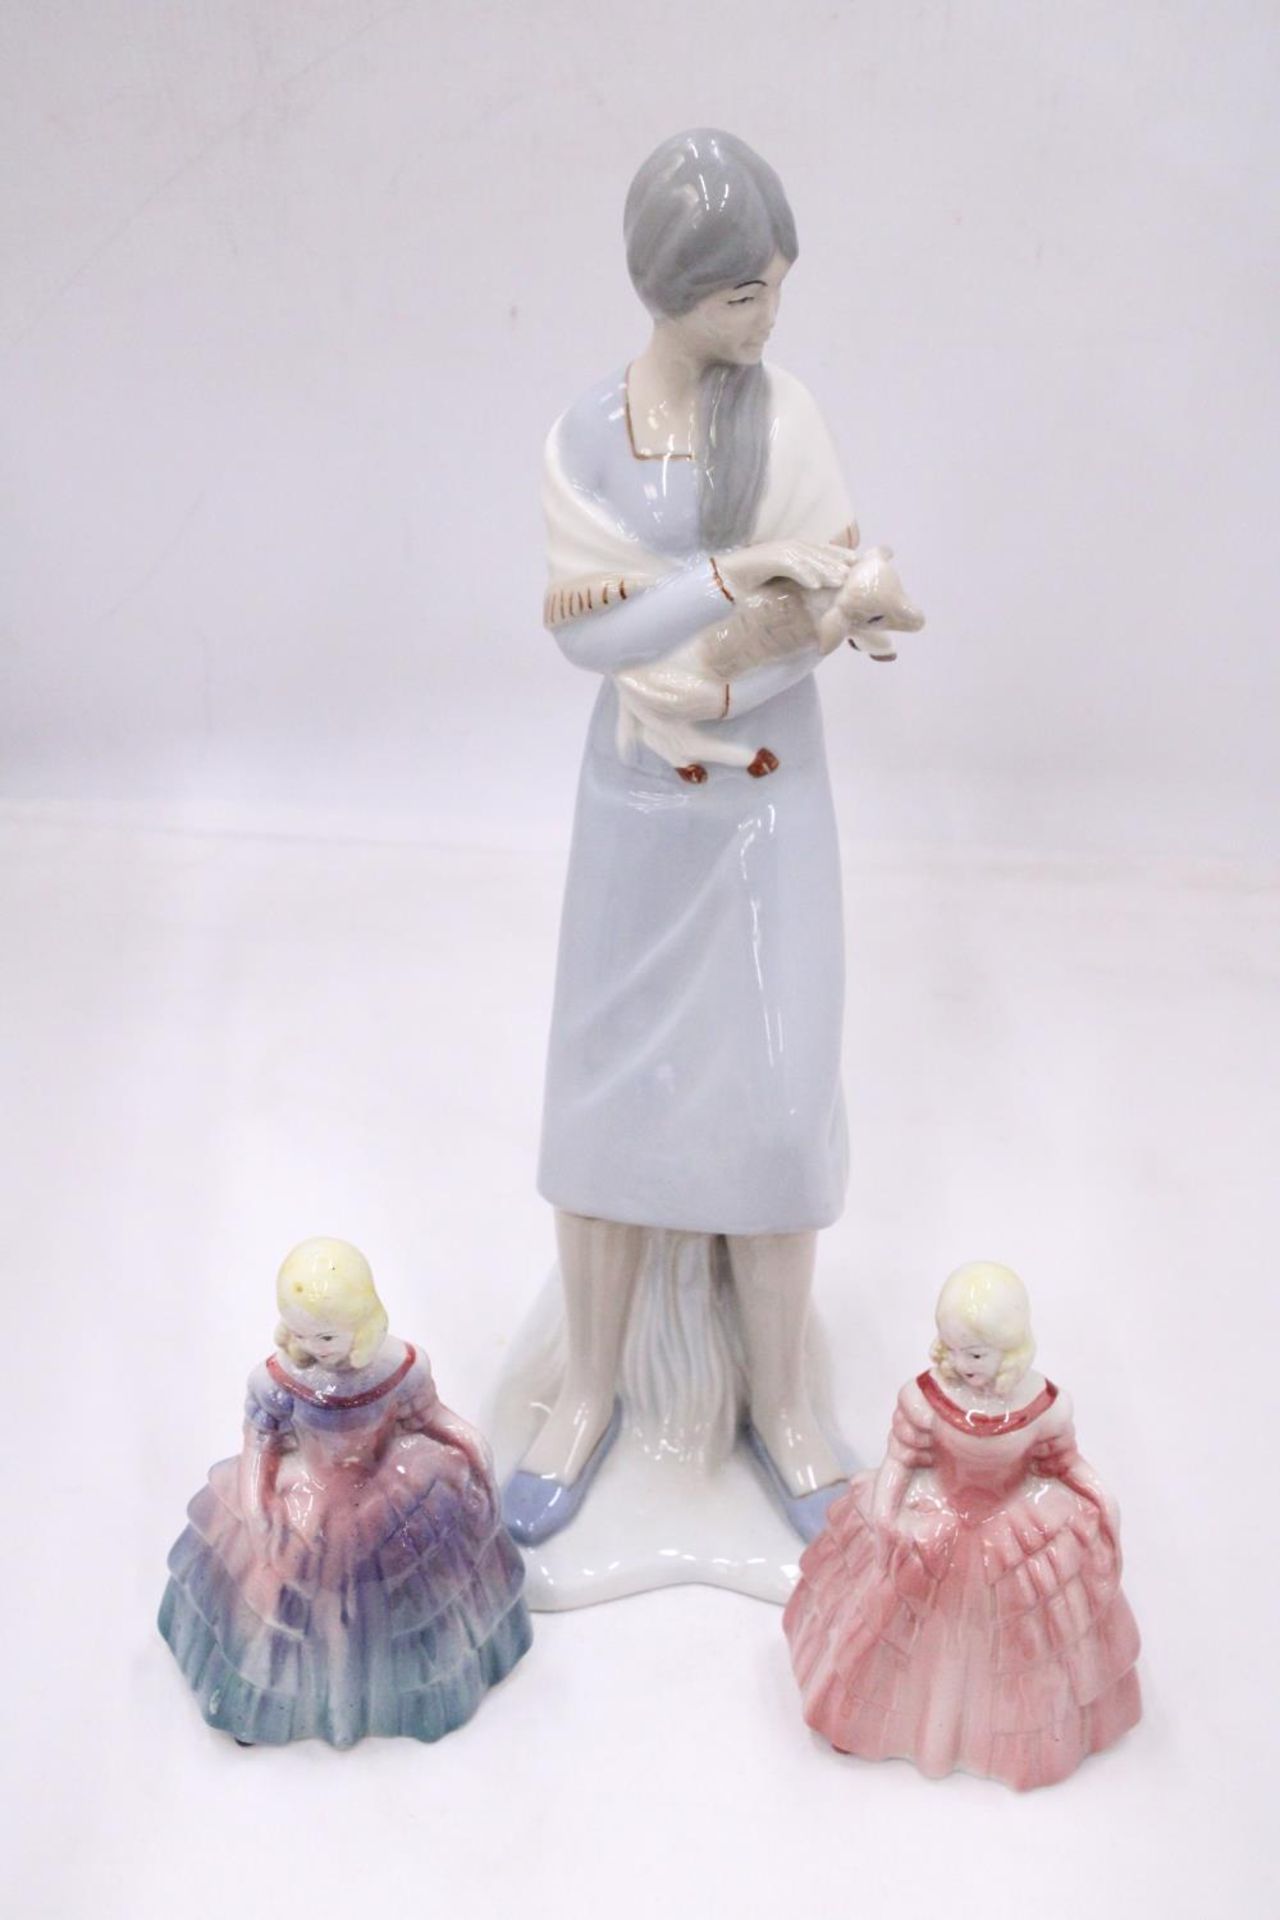 A LLADRO STYLE LADY FIGURE HOLDING A LAMB 38CM TALL, PLUS TWO ROYAL DOULTON STYLE FIGURES